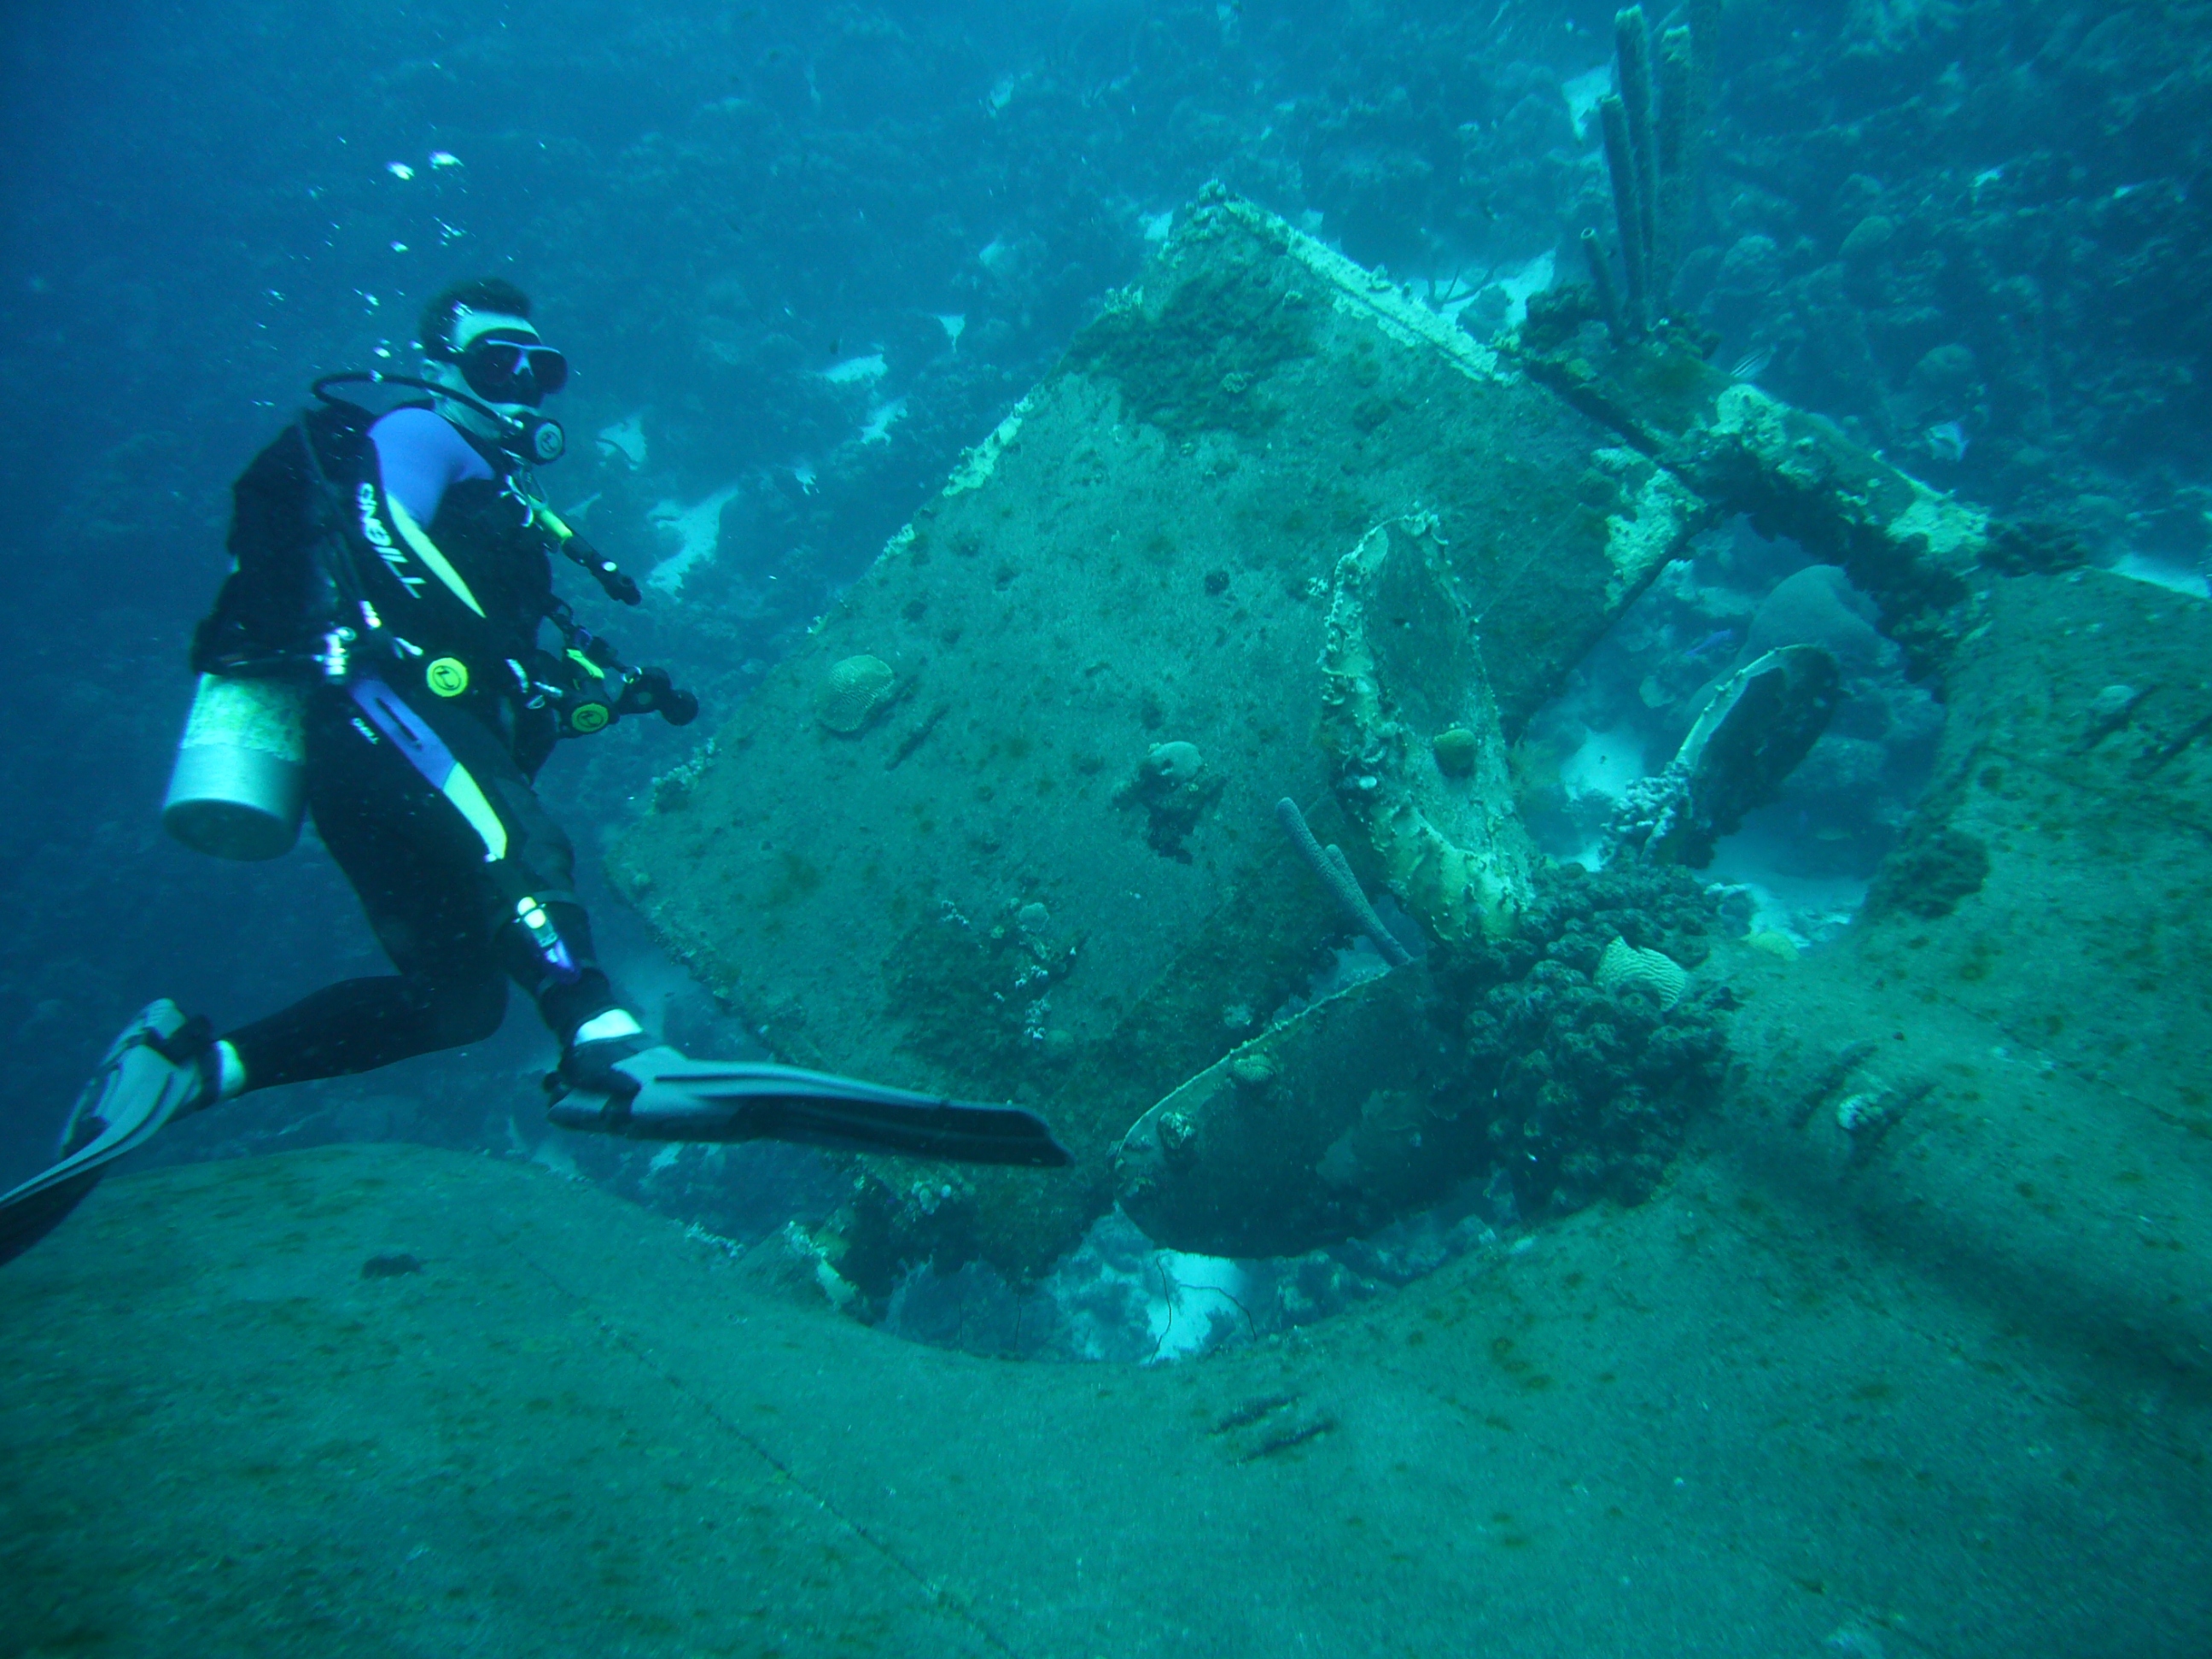 Nate at the Hilma Hooker Propellers